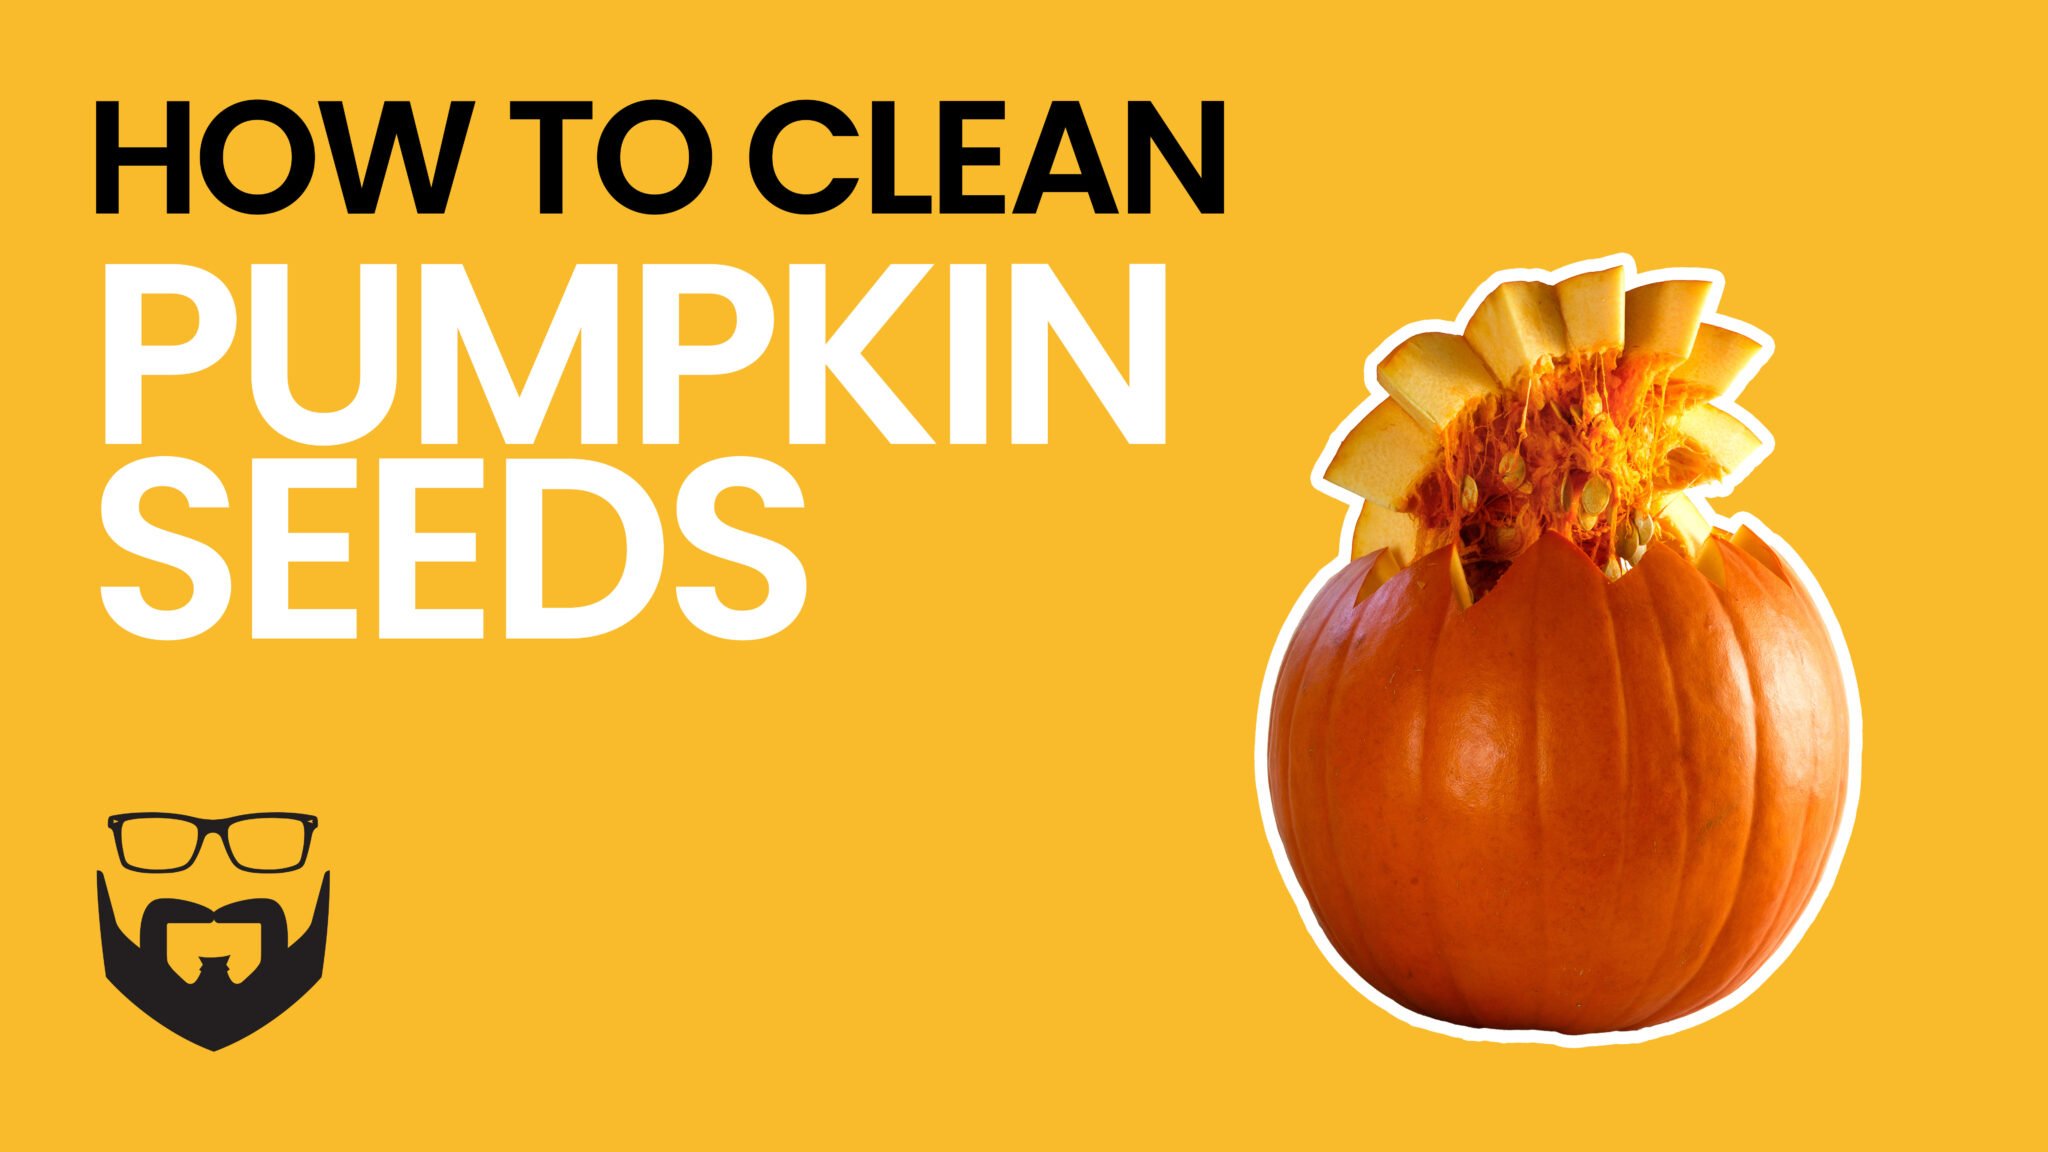 How to Clean Pumpkin Seeds Video - Yellow